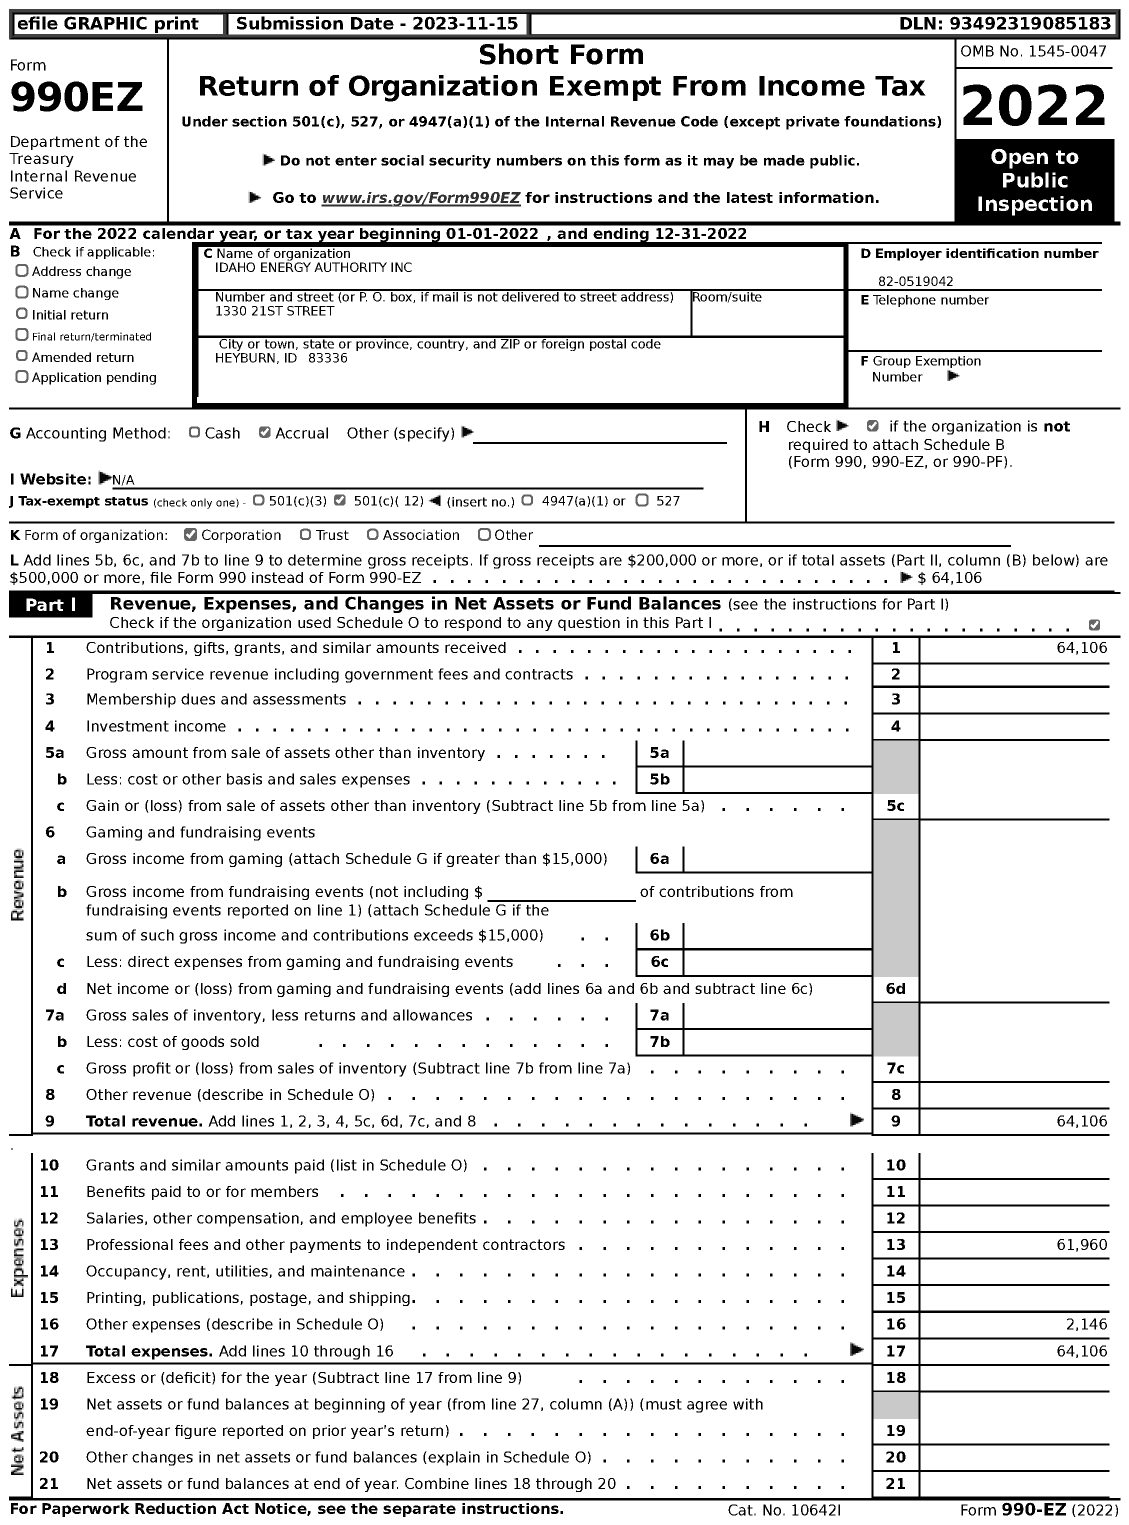 Image of first page of 2022 Form 990EZ for Idaho Energy Authority